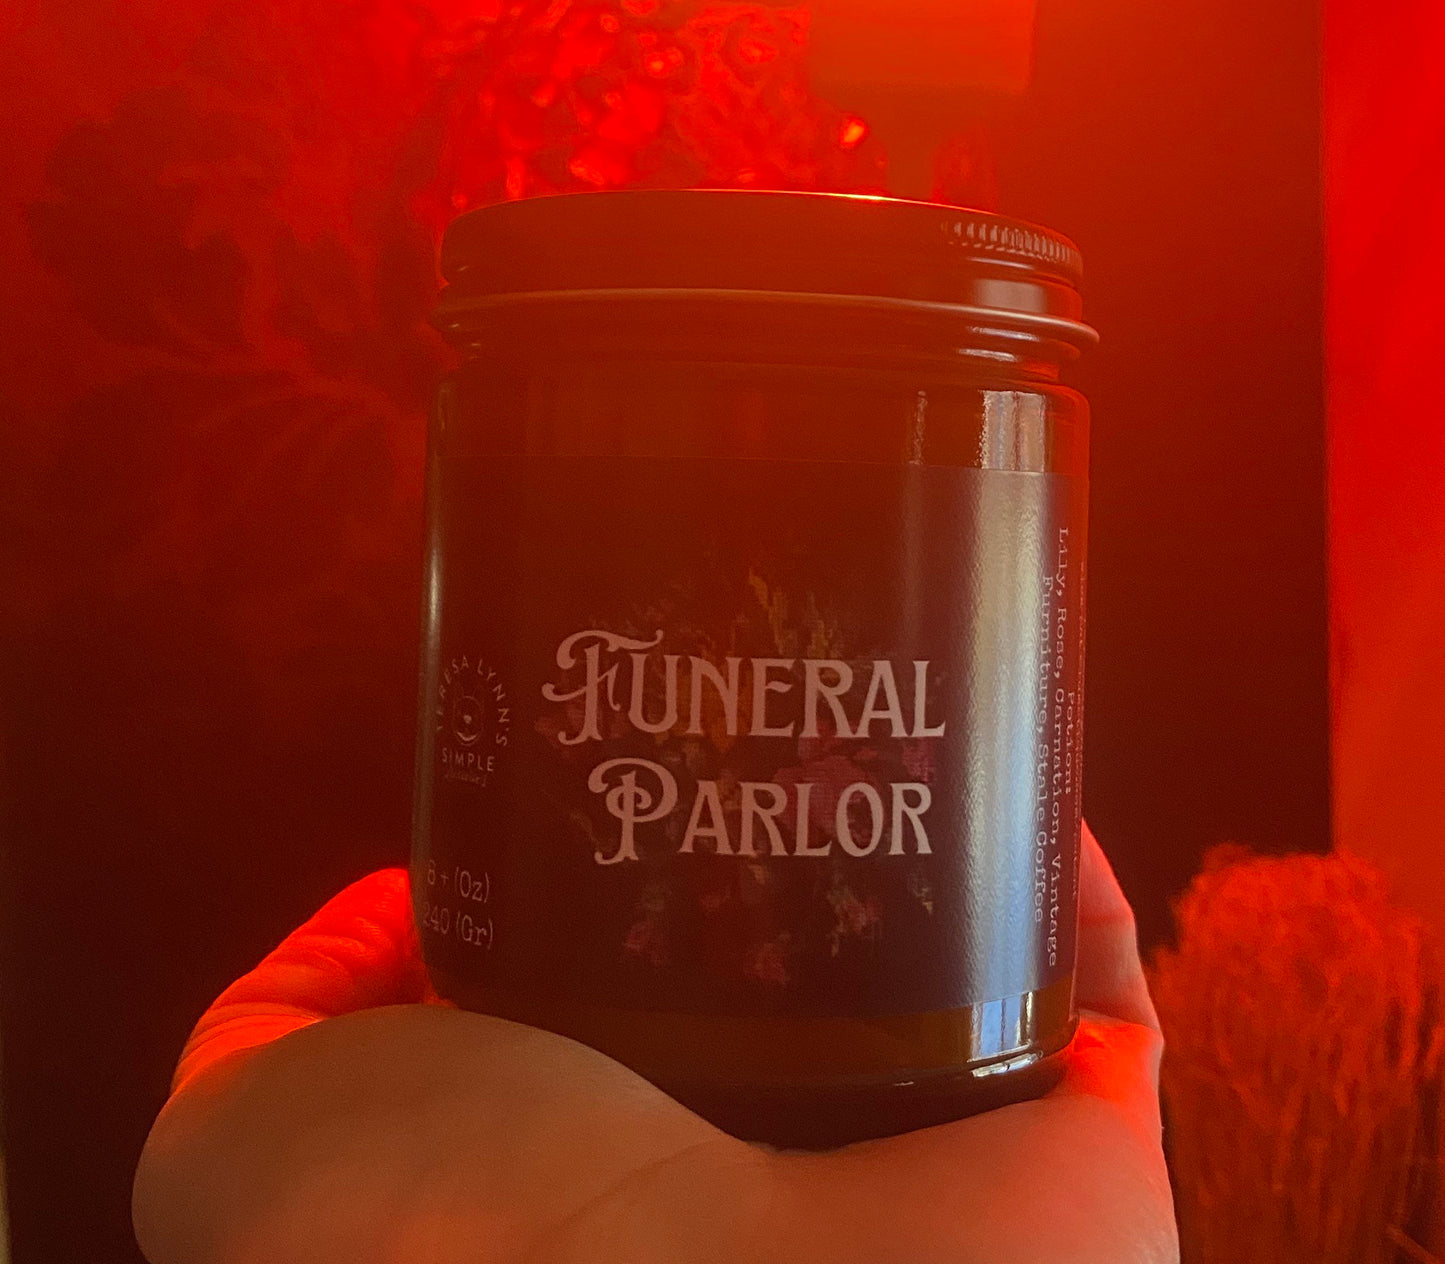 Funeral Parlor, scented soy wax wooden wick candle, essential oil and fragrance oil jar candle, mason jar candle, witchy candle, gothic